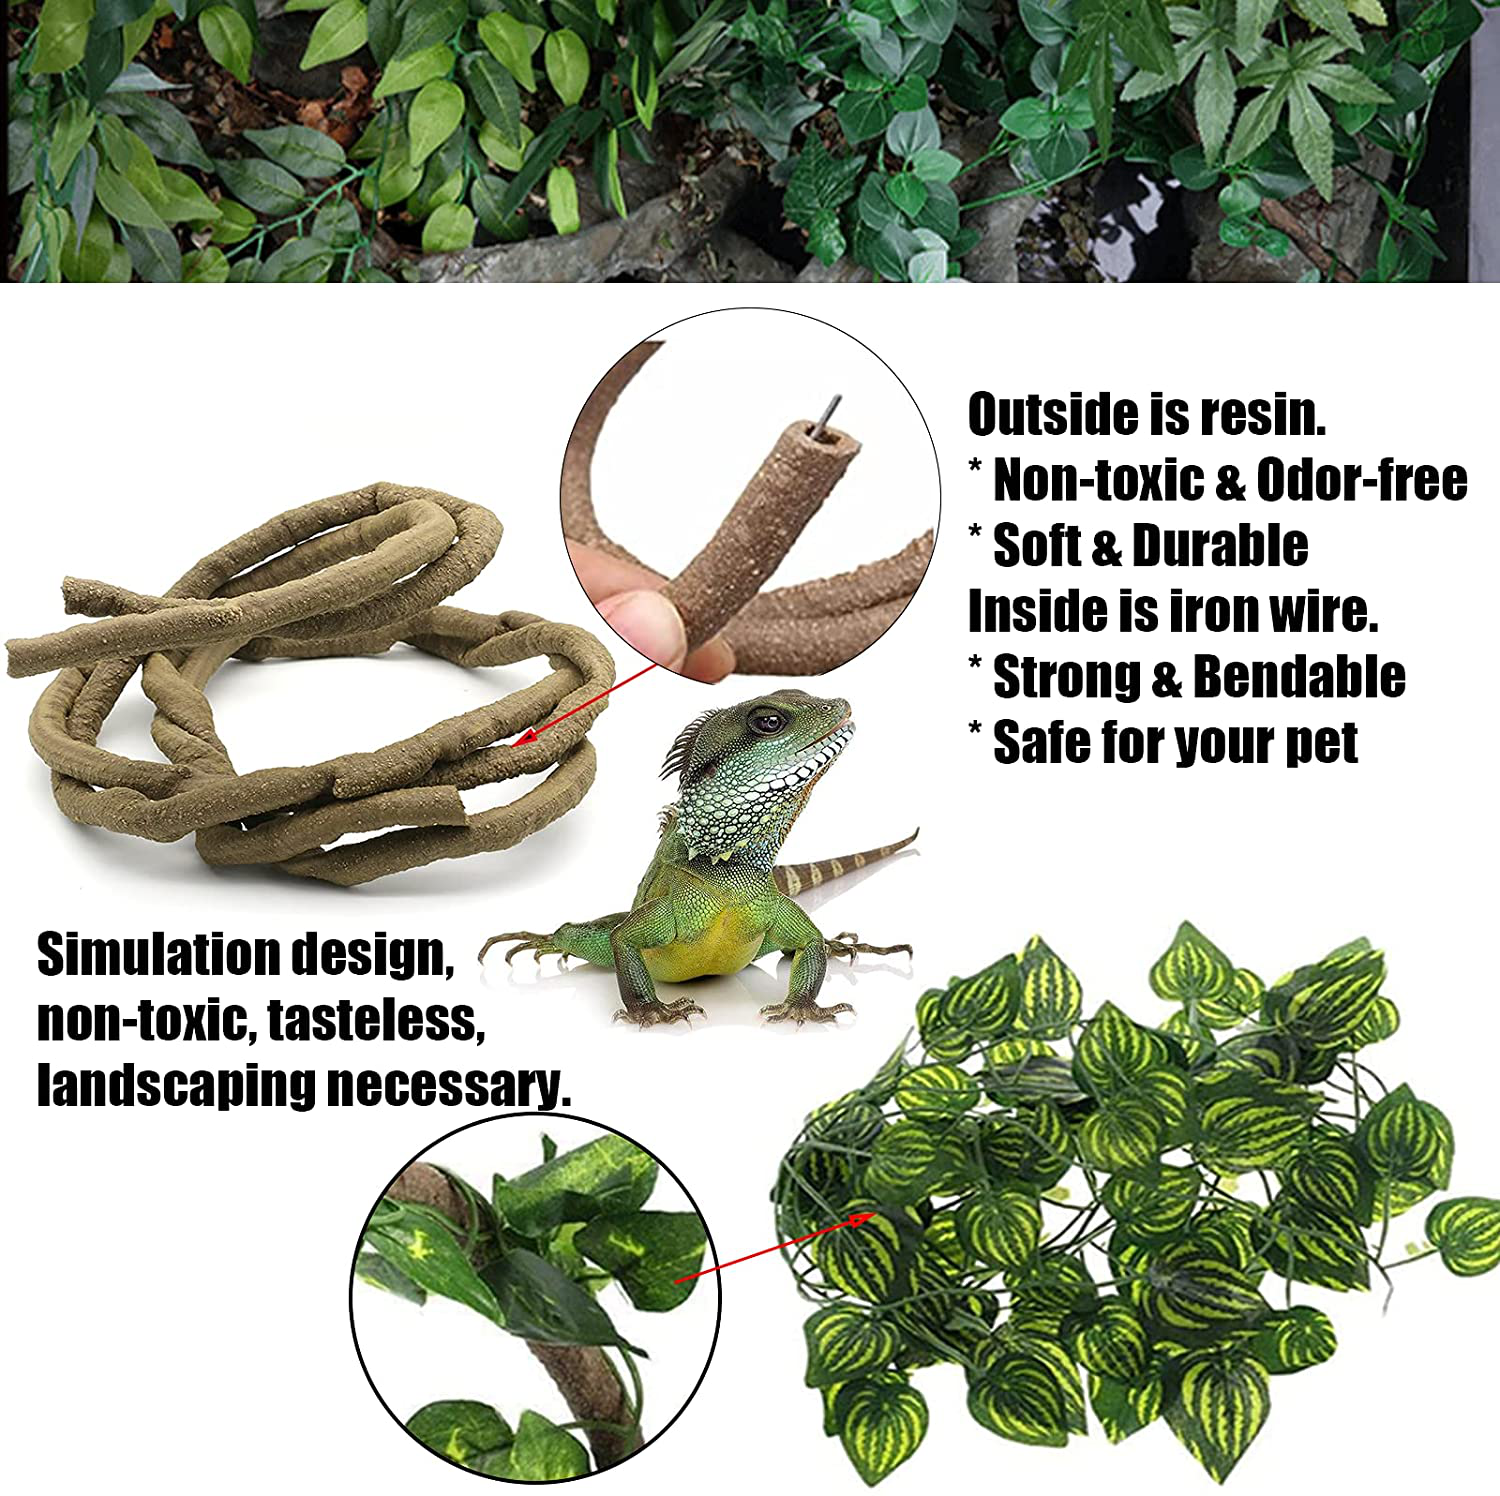 Lizard Bearded Dragon Hammock Set Tank Accessories, Coconut Shell Hut Hideout Cave Natural Seagrass Jungle Climber, Flexible Bend-A Branch Jungle Climbing Vines for Geckos and More Reptiles Perched